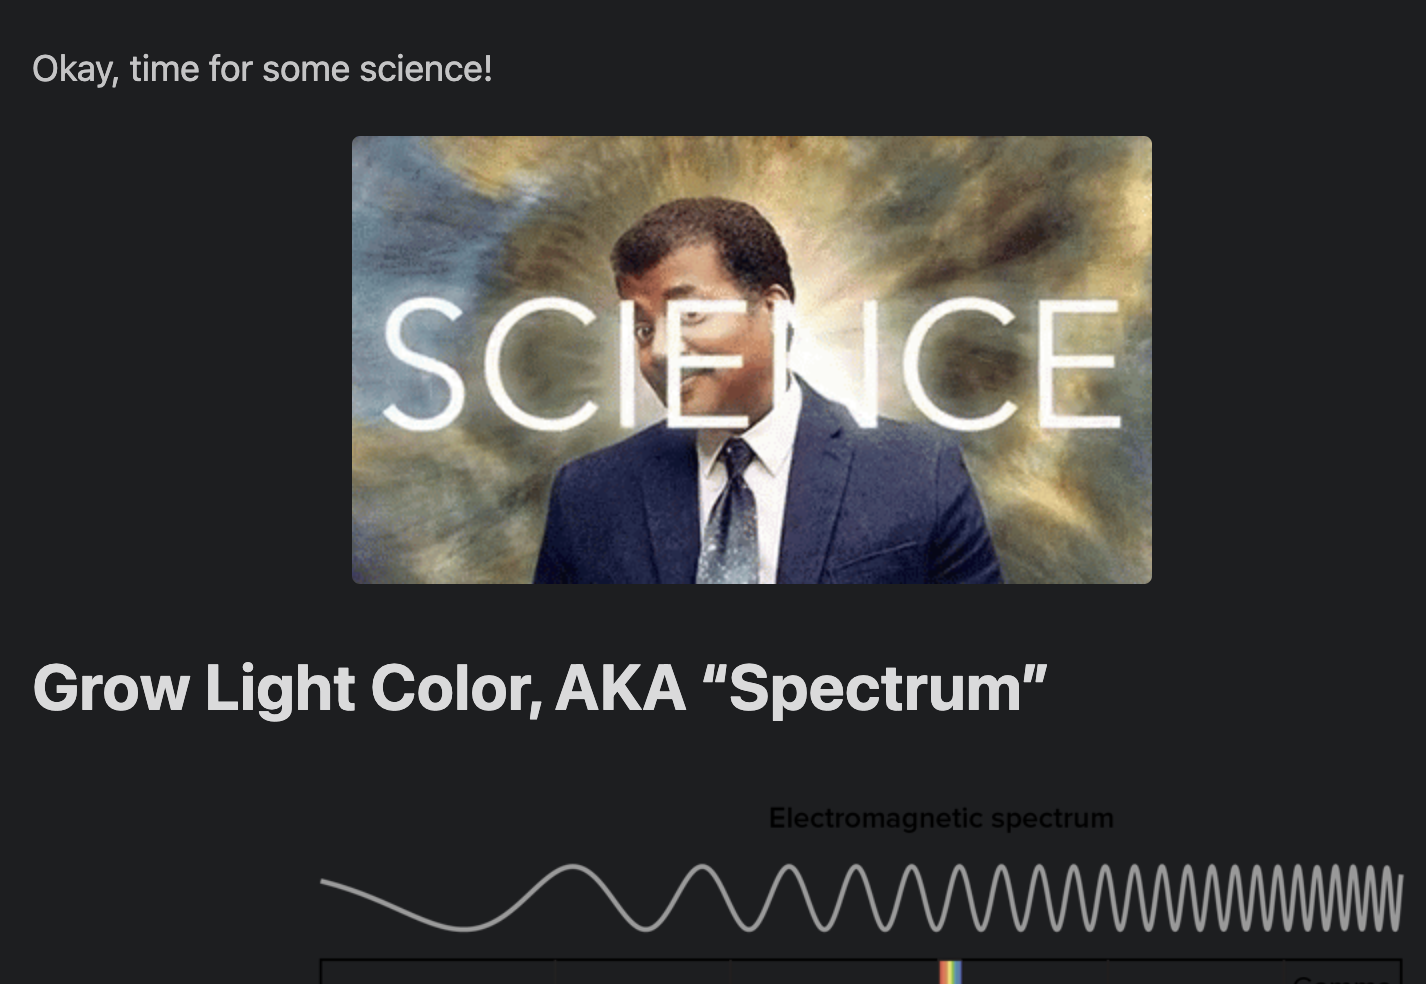 Example: Neil DeGrass Tyson GIF from a recent article on grow lighting.